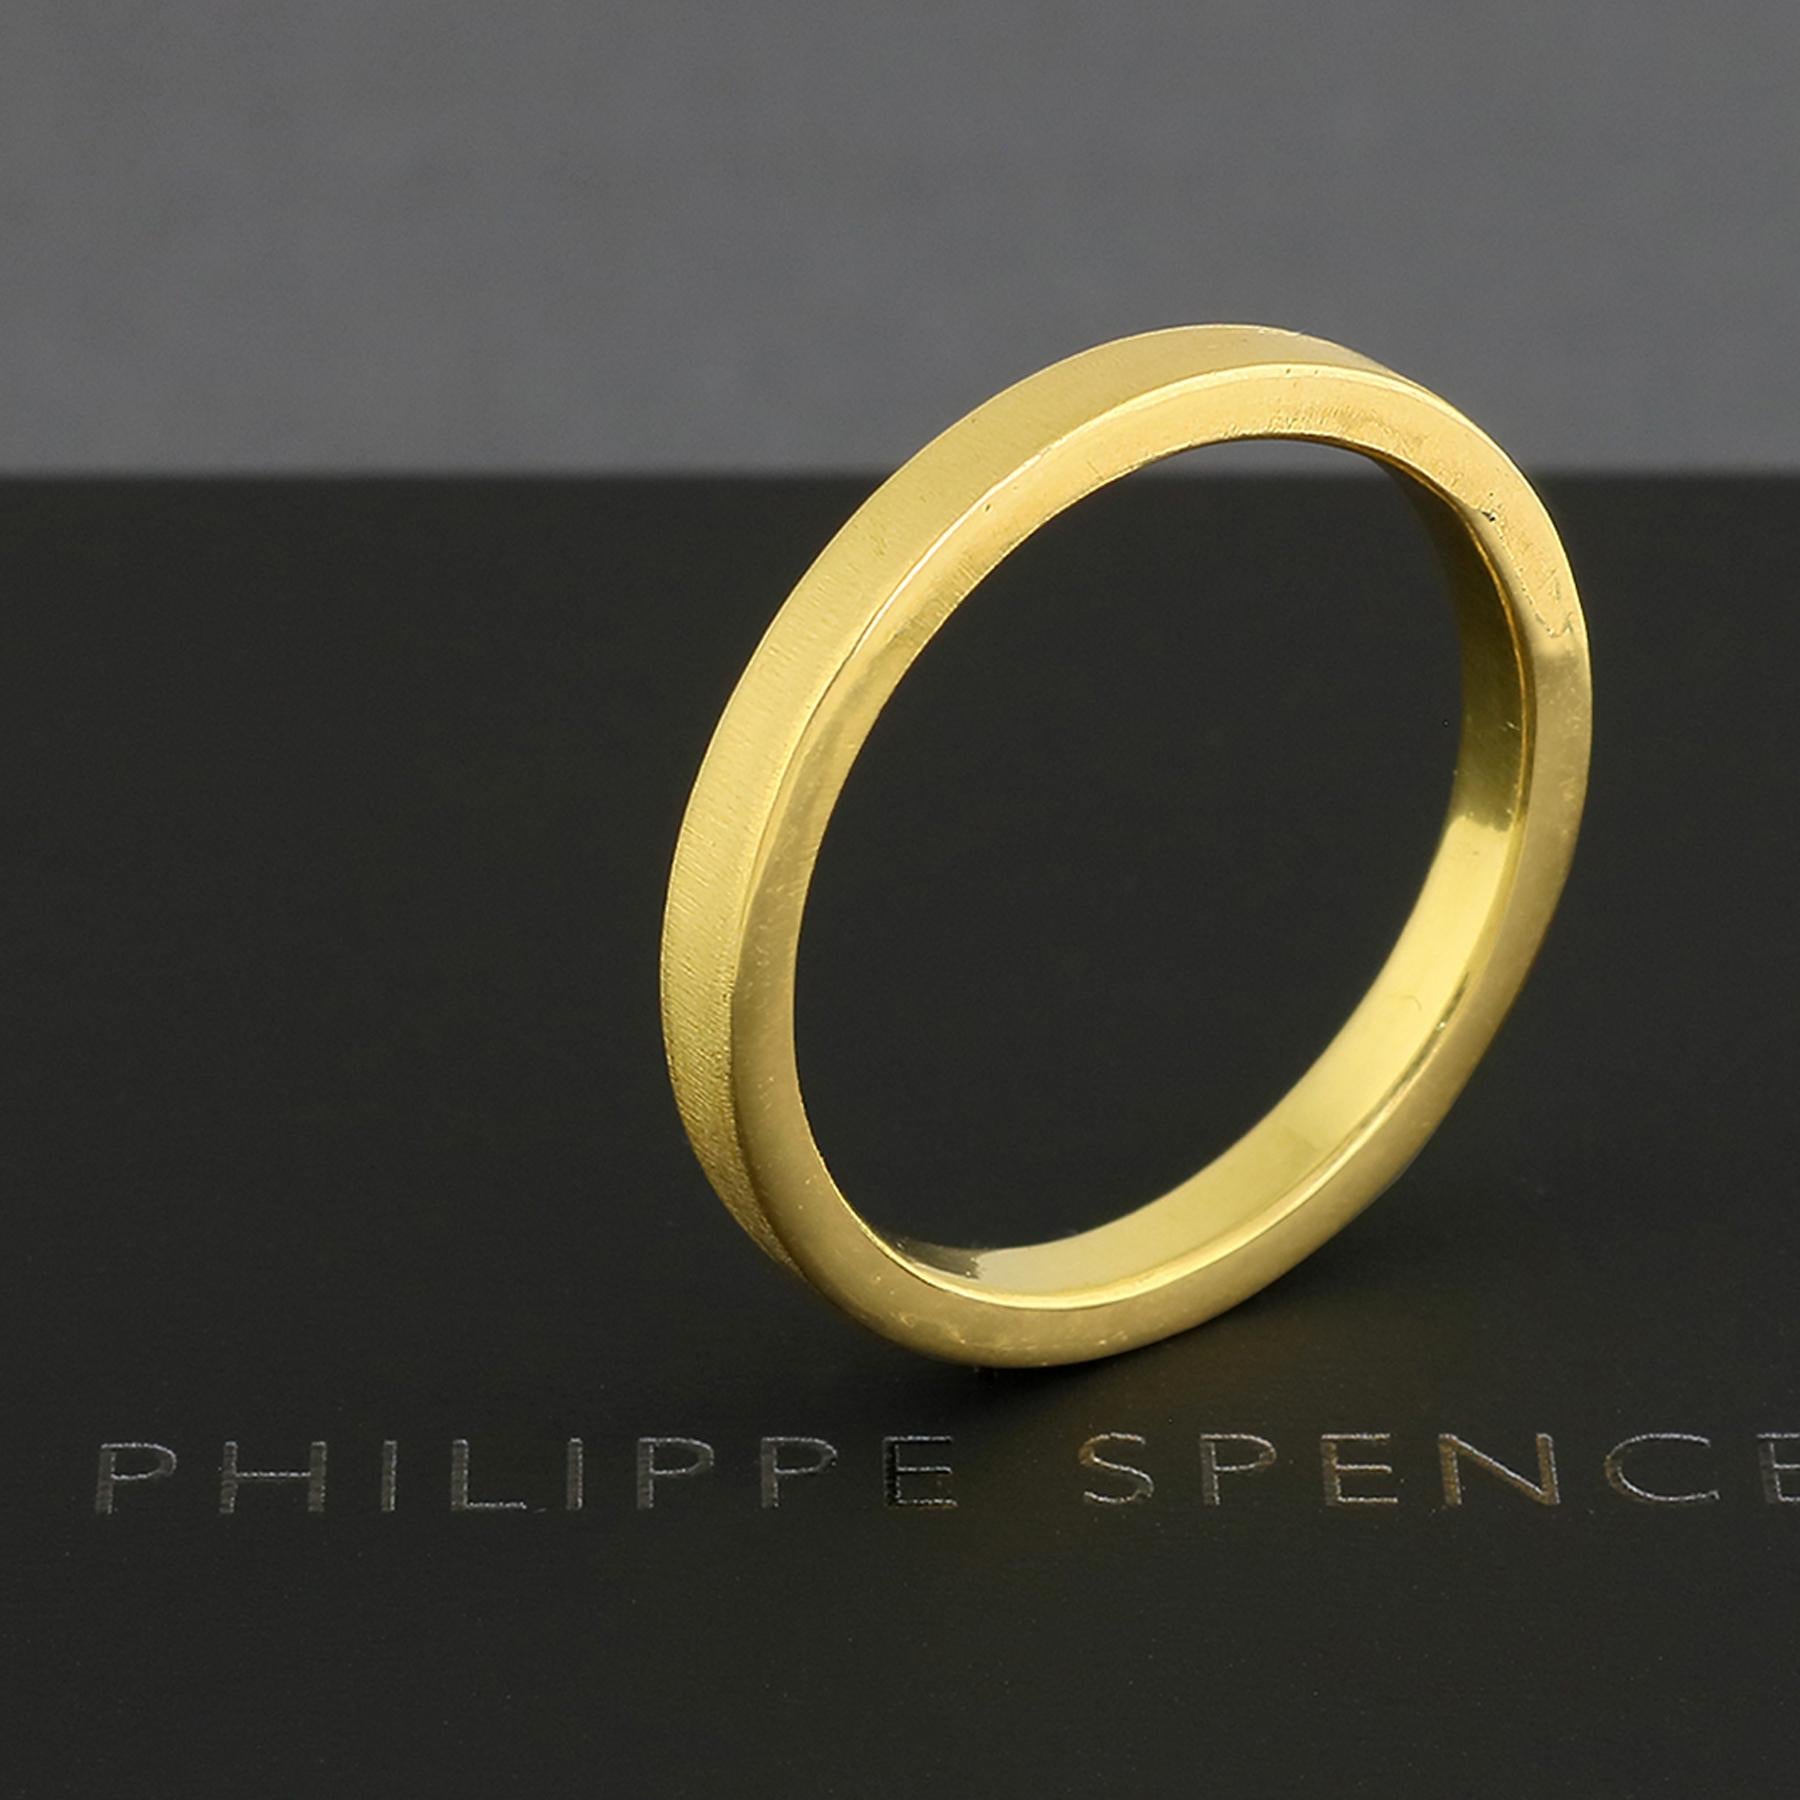 PHILIPPE-SPENCER - 2.75 X 2mm Solid 20K Gold Hand & Anvil Forged Band. Heavy Matte Exterior, Mirror Polished Interior Finish.  Each is a unique one-of-a-kind work of art.

This in-stock item is a size 10, and ready to ship. Also available in sizes 6